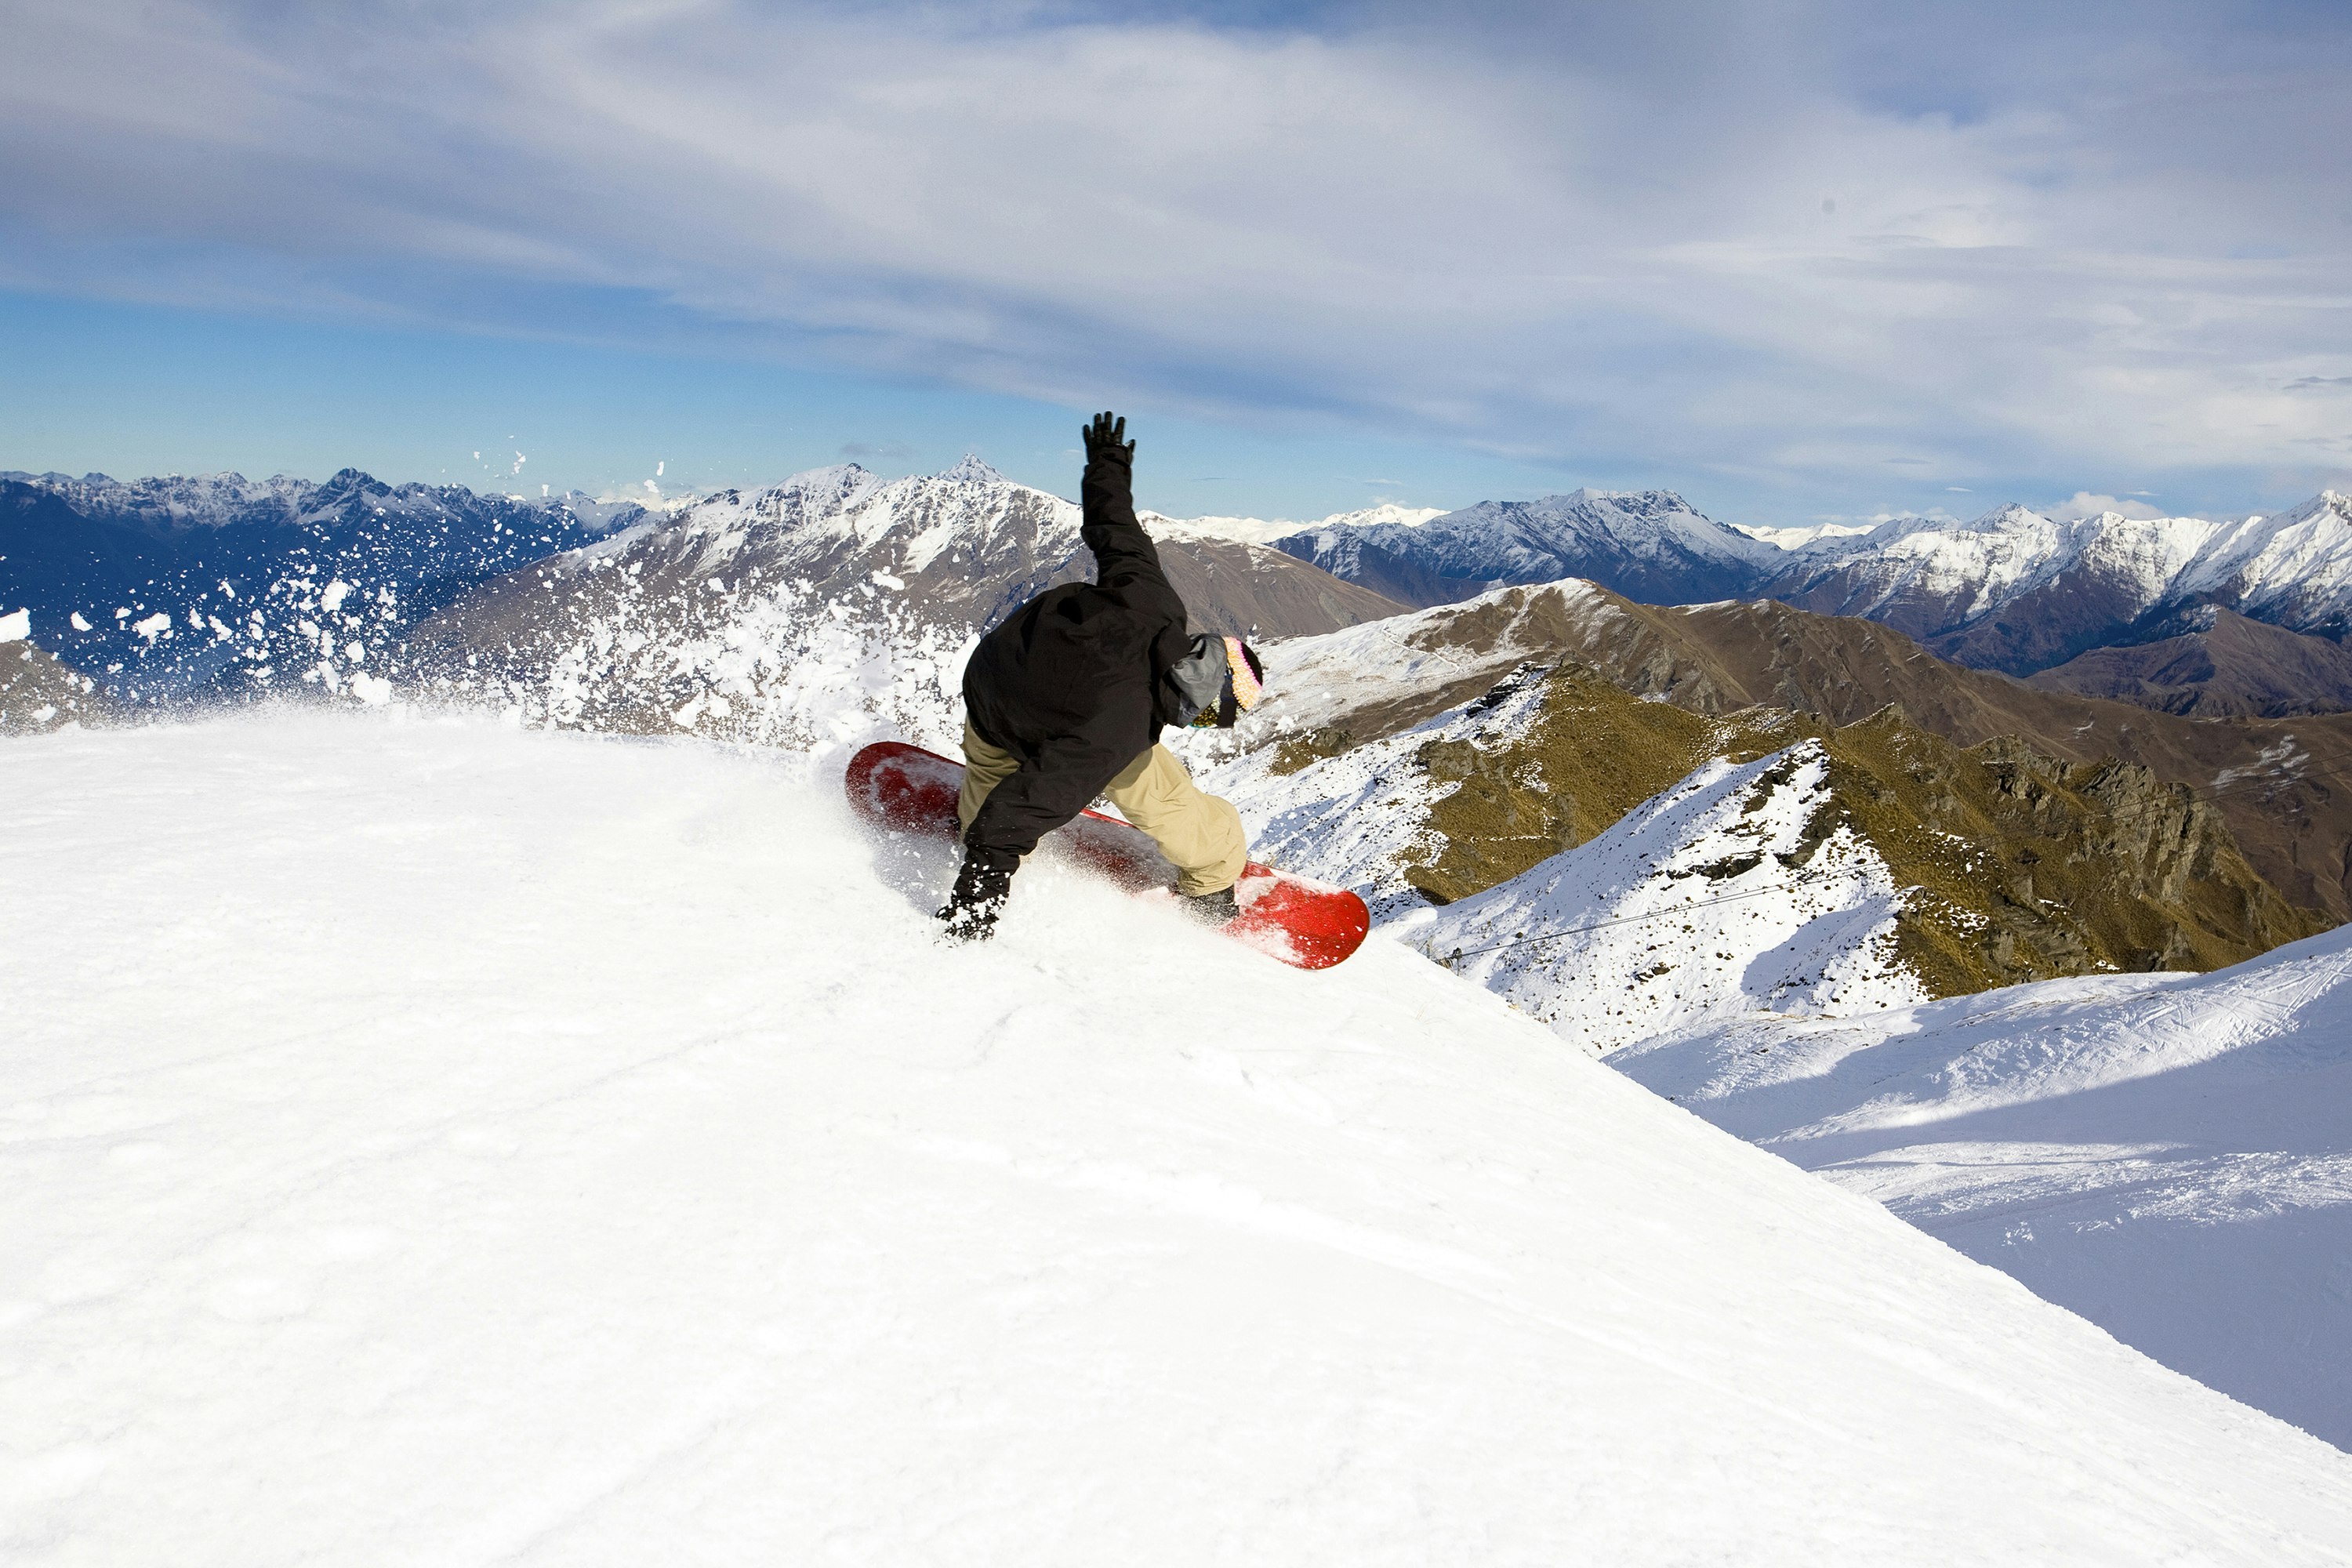 Features - A male snowboarder blasts a heel side turn while snowboarding at Coronet Peak in Queenstown, New Zealand.